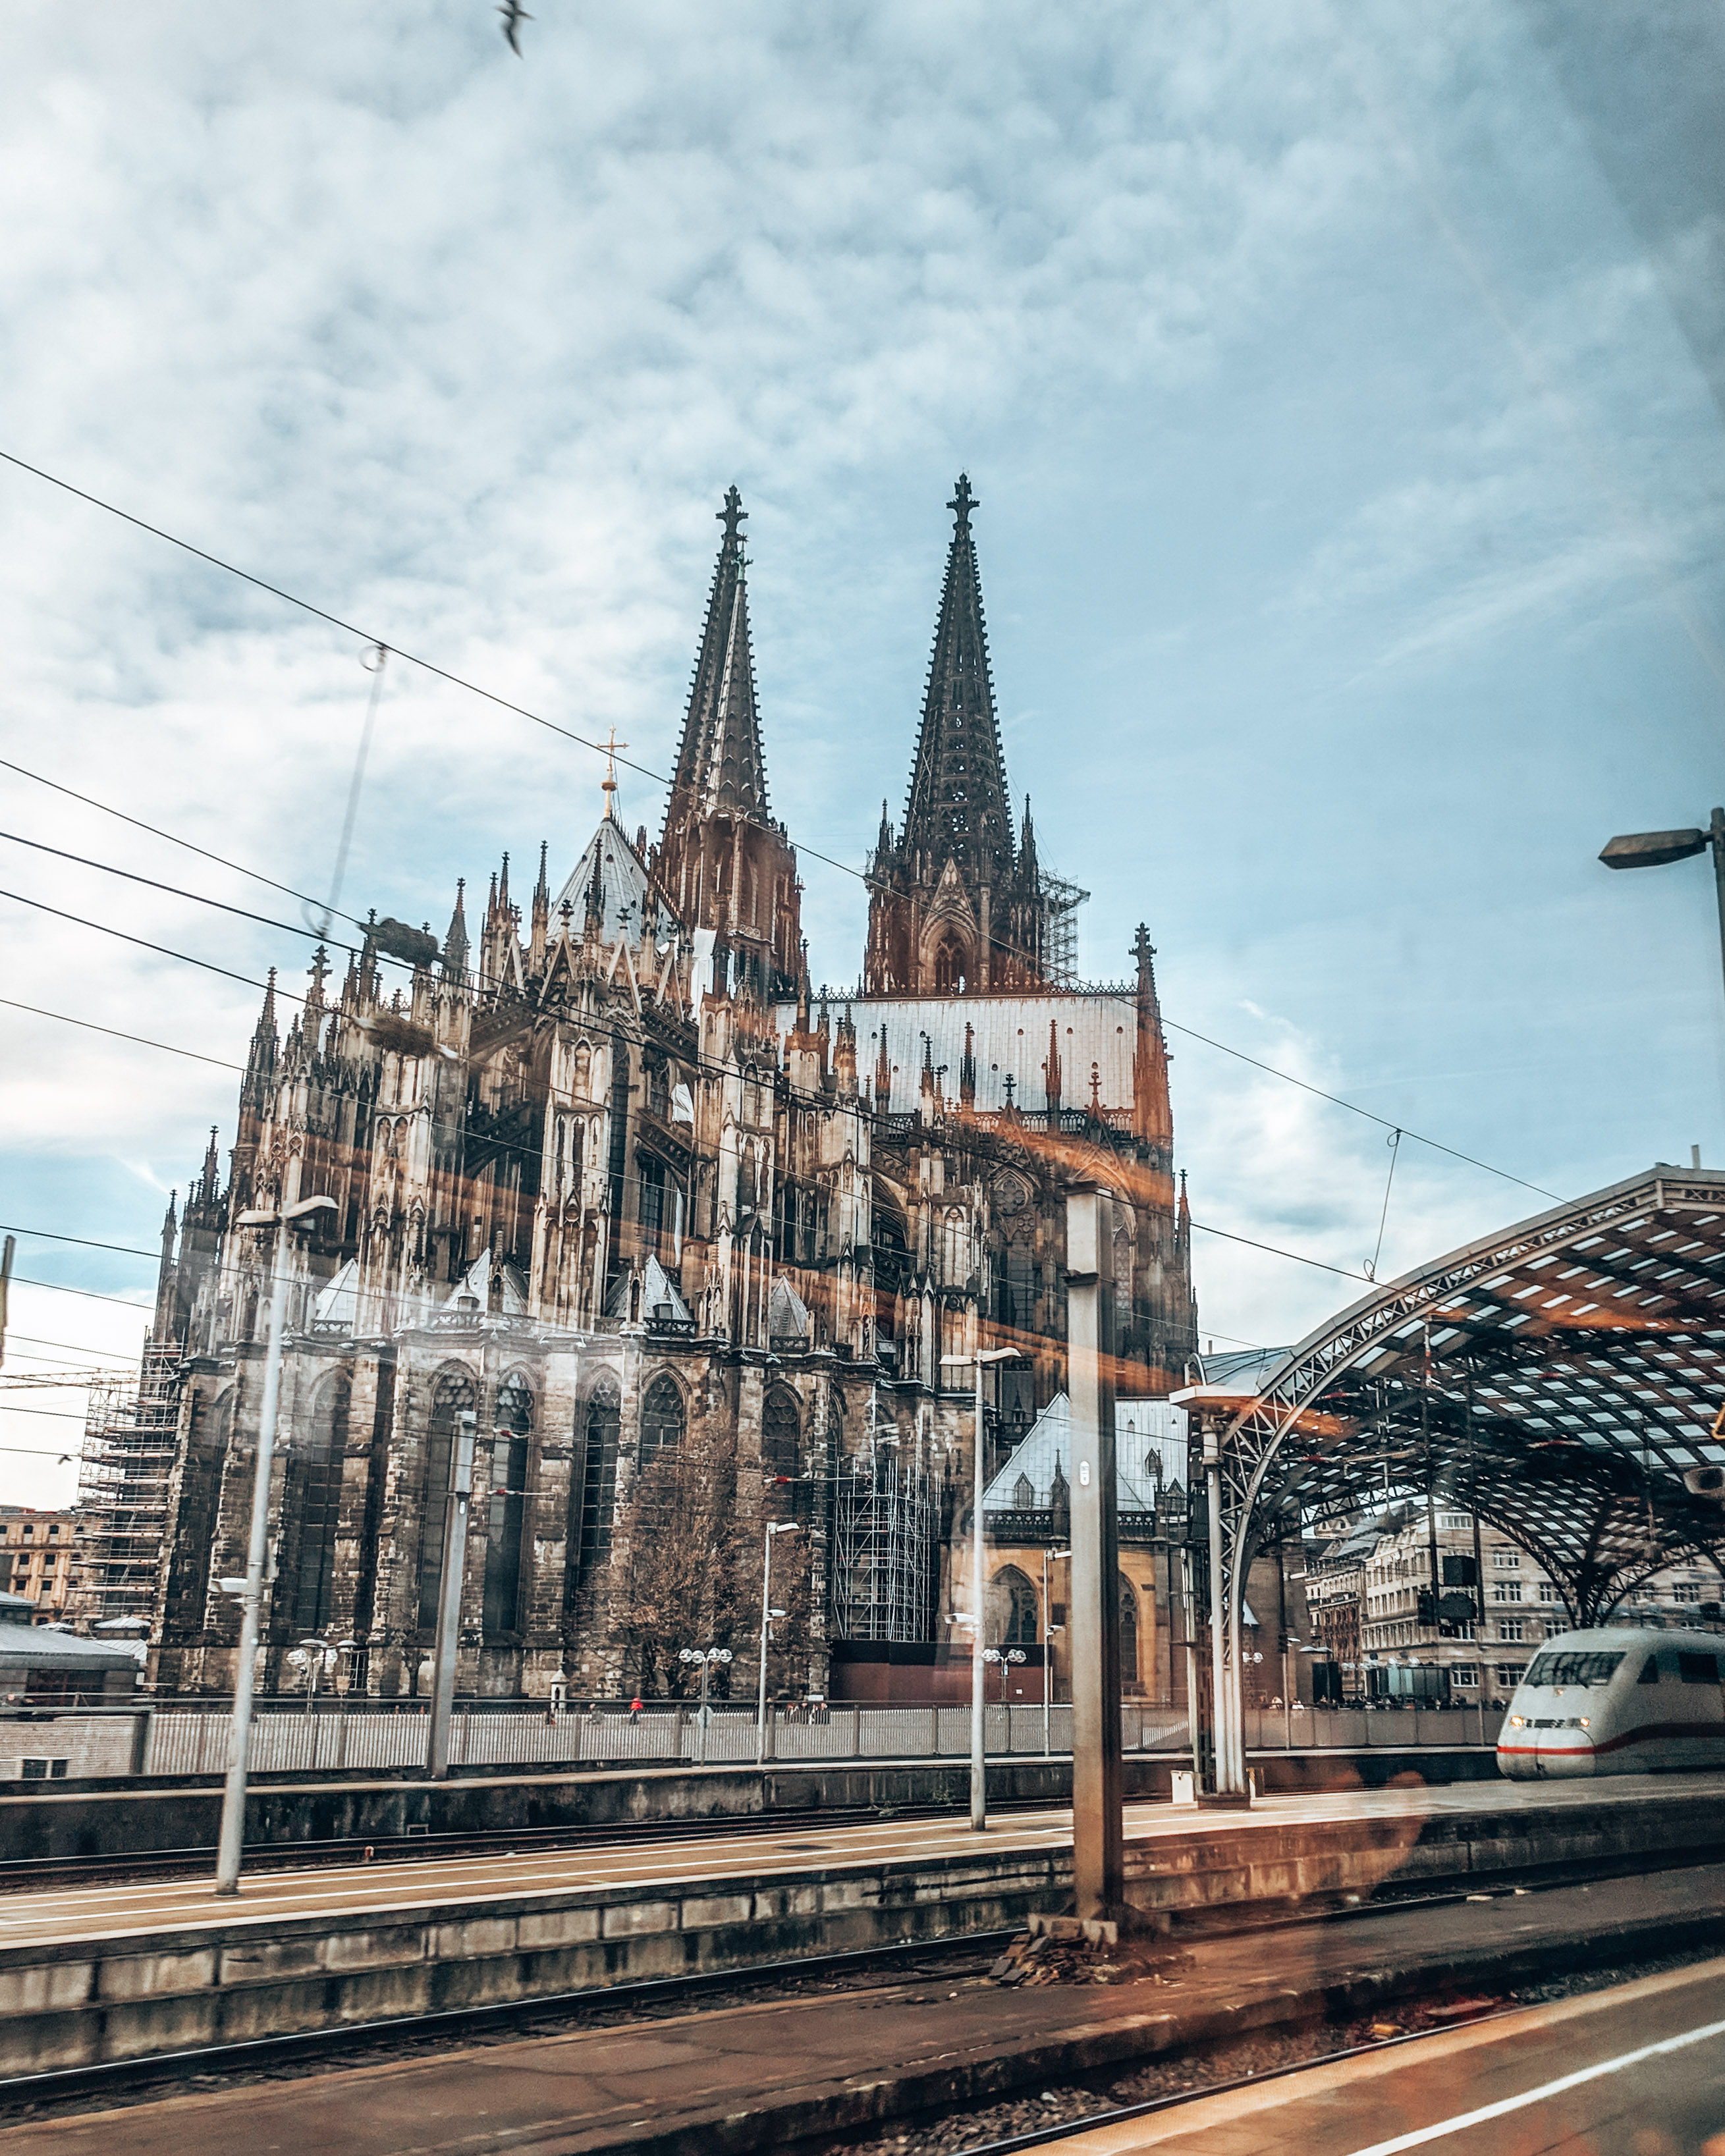 Passing by The Cologne cathedral in Germany by train